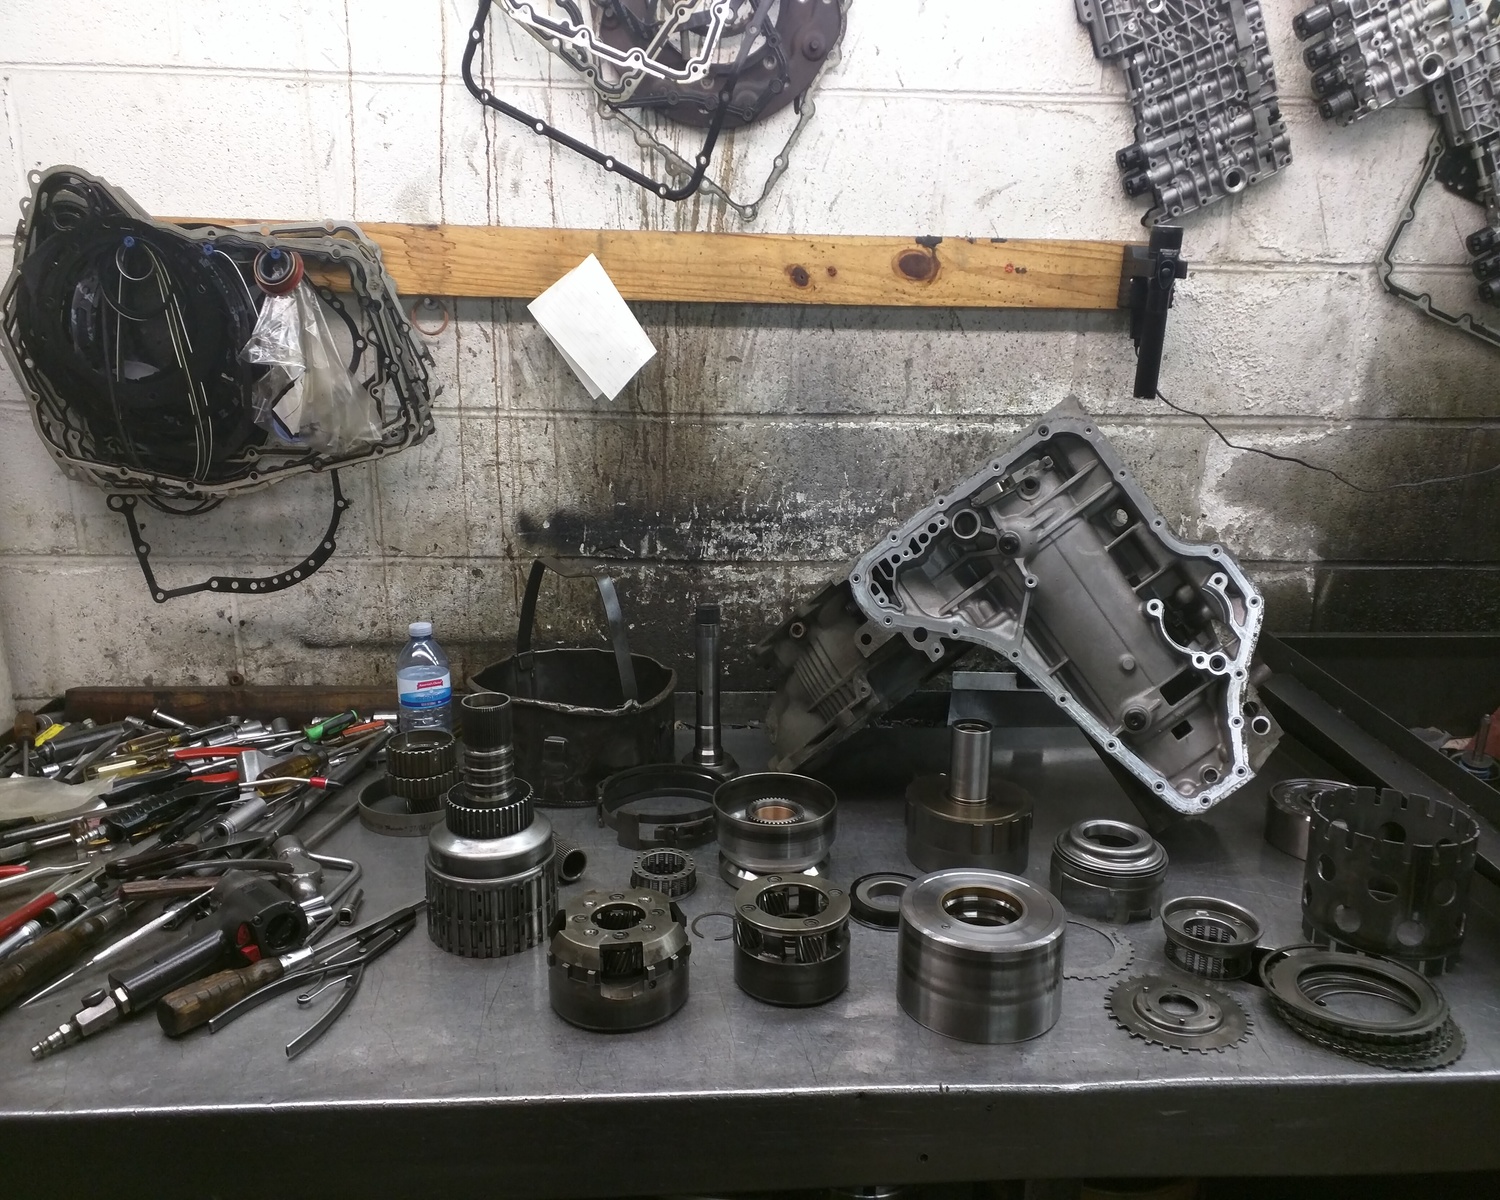 Transmission Rebuild 19136 Philadelphia We Rebuild Transmissions We repair all makes and models of all manual & automatic transmissions but also four-wheel drive transmissions and front wheel drive transmissions